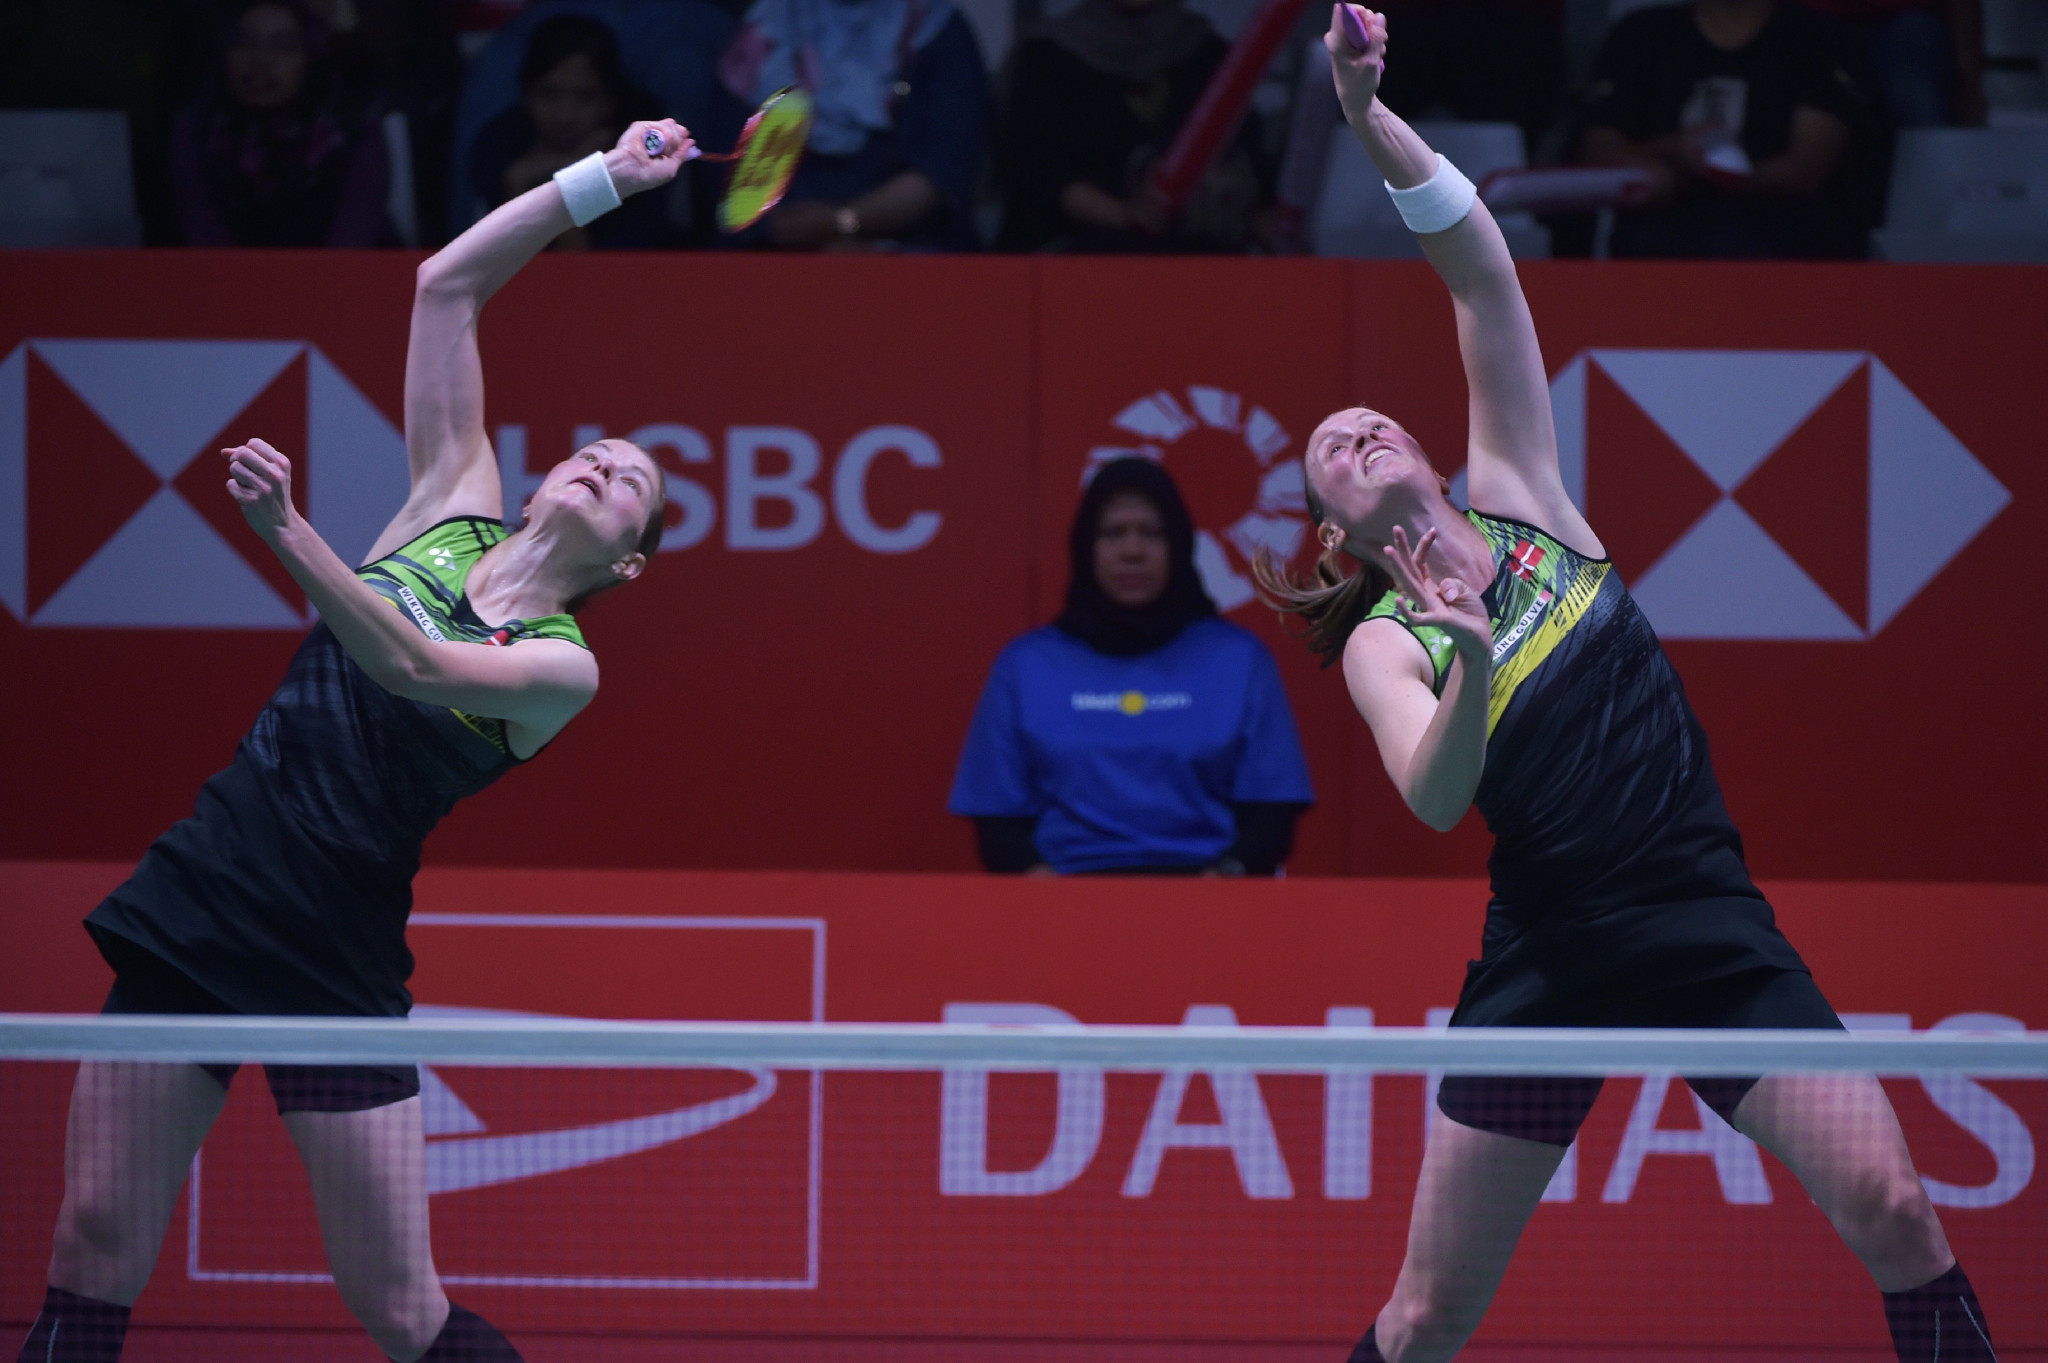 Denmark's Olympic silver medallists Kamilla Rytter Juhl, right, and Christinna Pedersen, left, won their opening match at the BWF India Open to live up to their favourites tag ©Getty Images